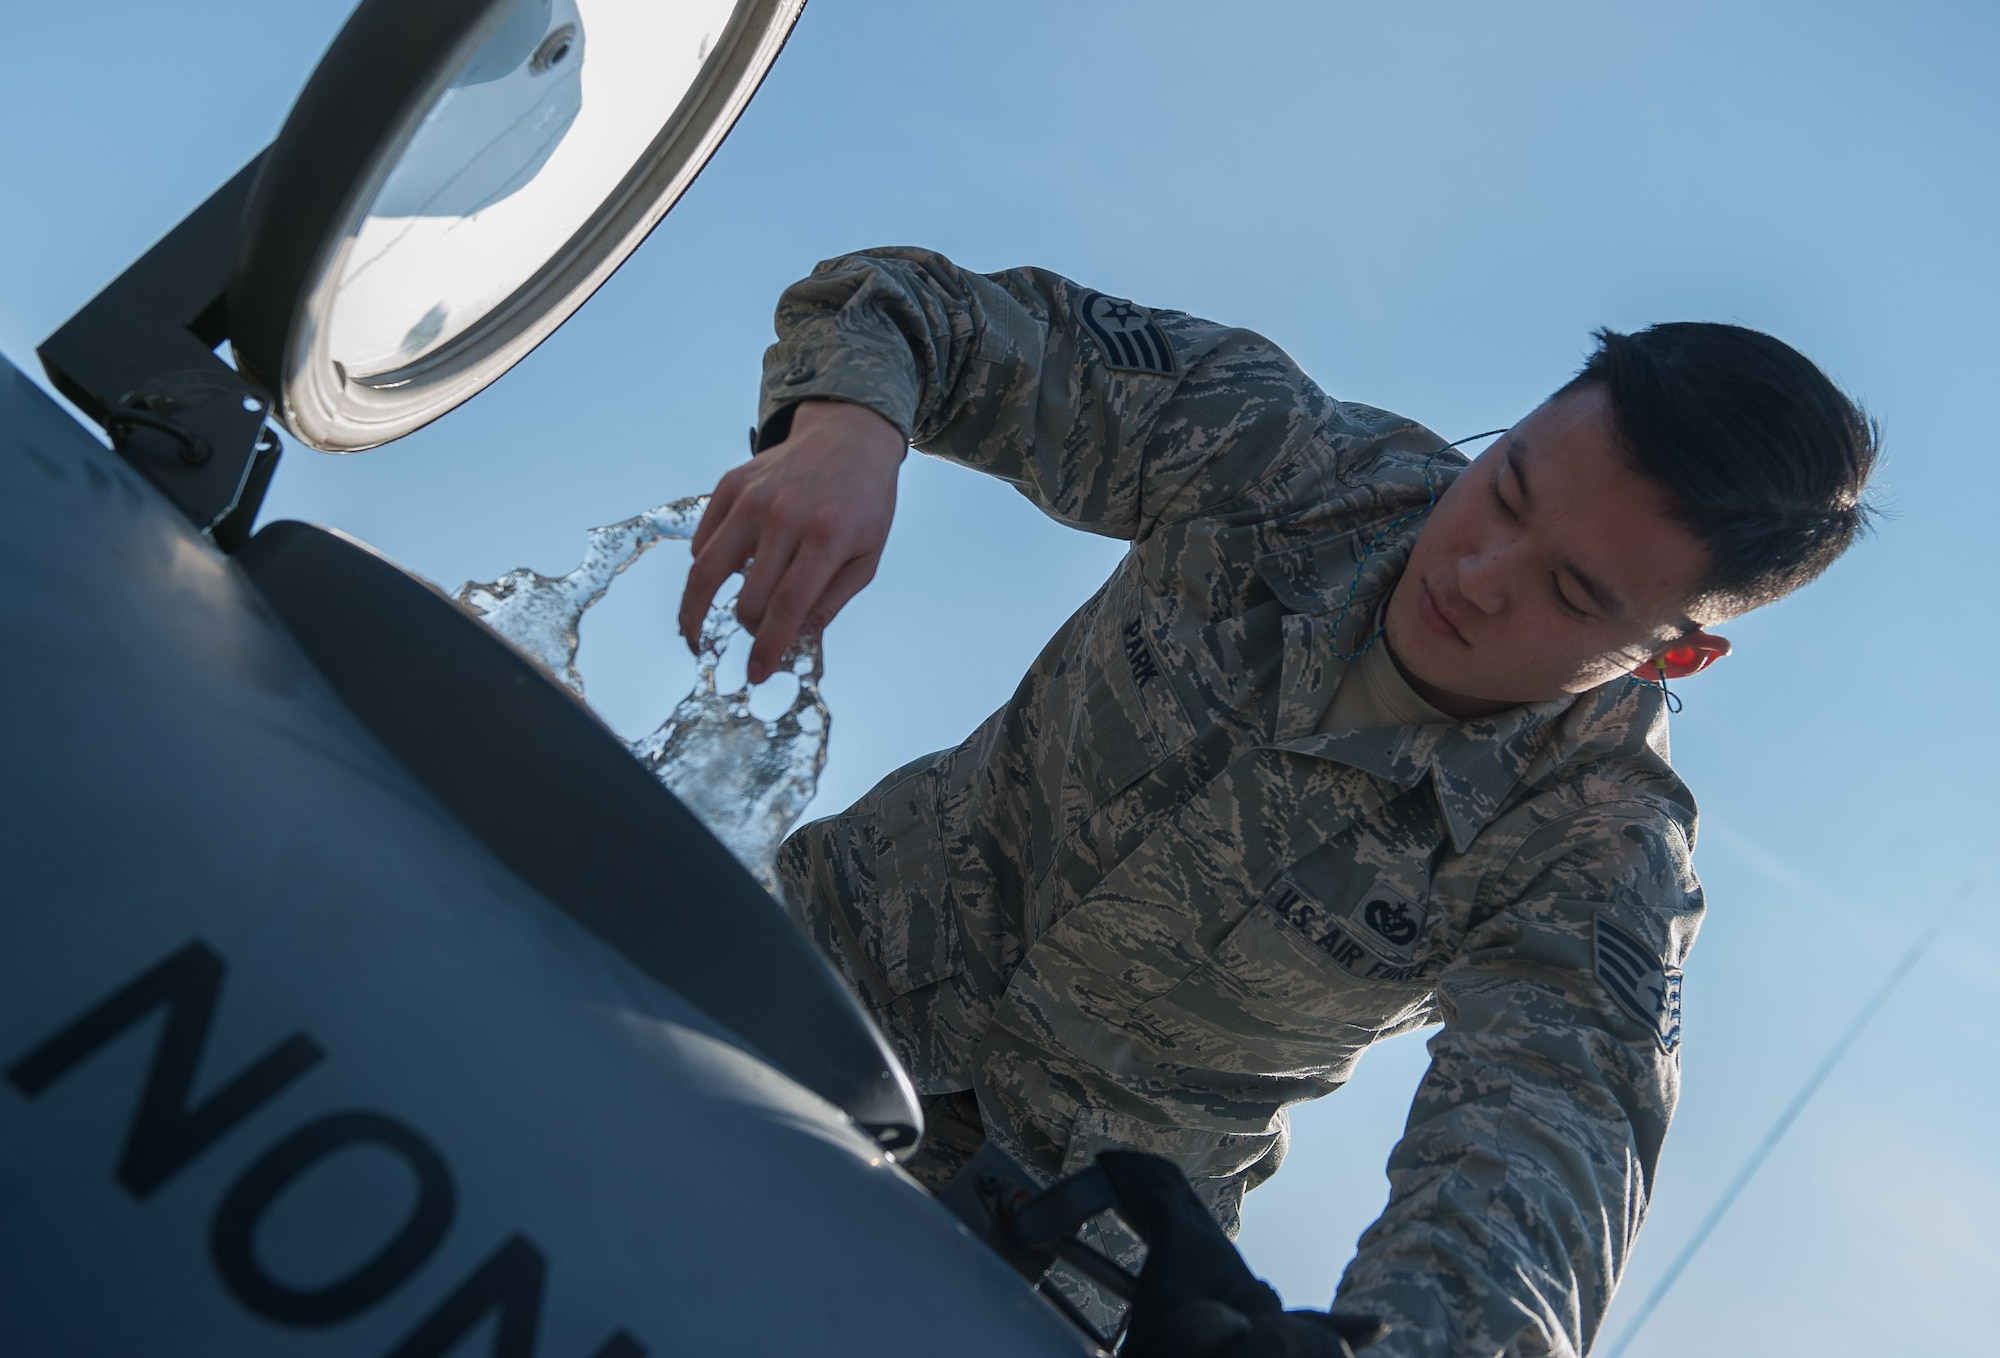 Staff Sgt. Ju Ho Park, 1st Combat Communications Squadron electrical power production craftsman, pulls ice out of a water tank during a training exercise on Ramstein Air Base, Germany, Feb. 16, 2017. Airmen from 1 CBCS use mock-deployment exercises to enhance job skills and maintain equipment to be prepared for deployments at any given time. (U.S. Air Force photo by Senior Airman Lane T. Plummer)